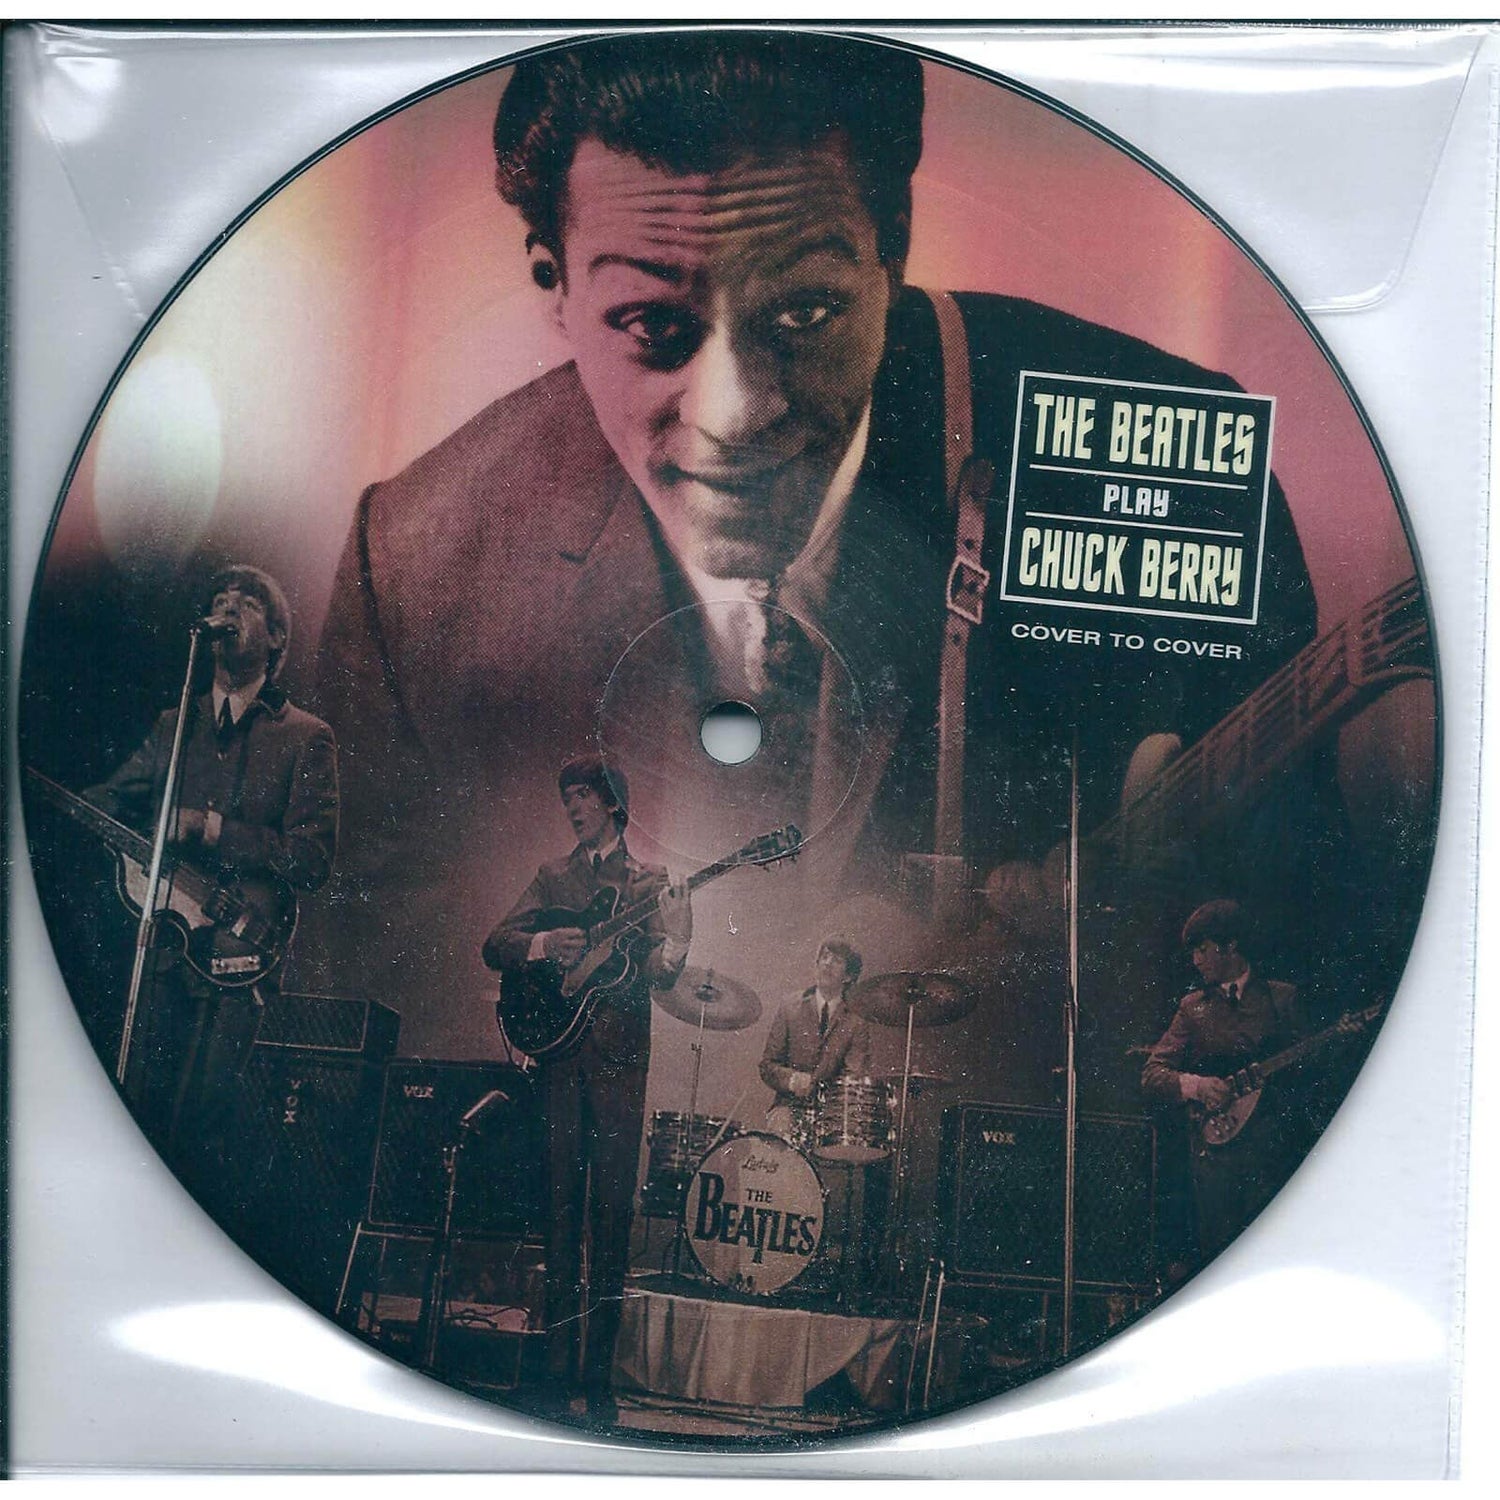 The Beatles - Beatles Play Chuck Berry (Picture Disc) 7"